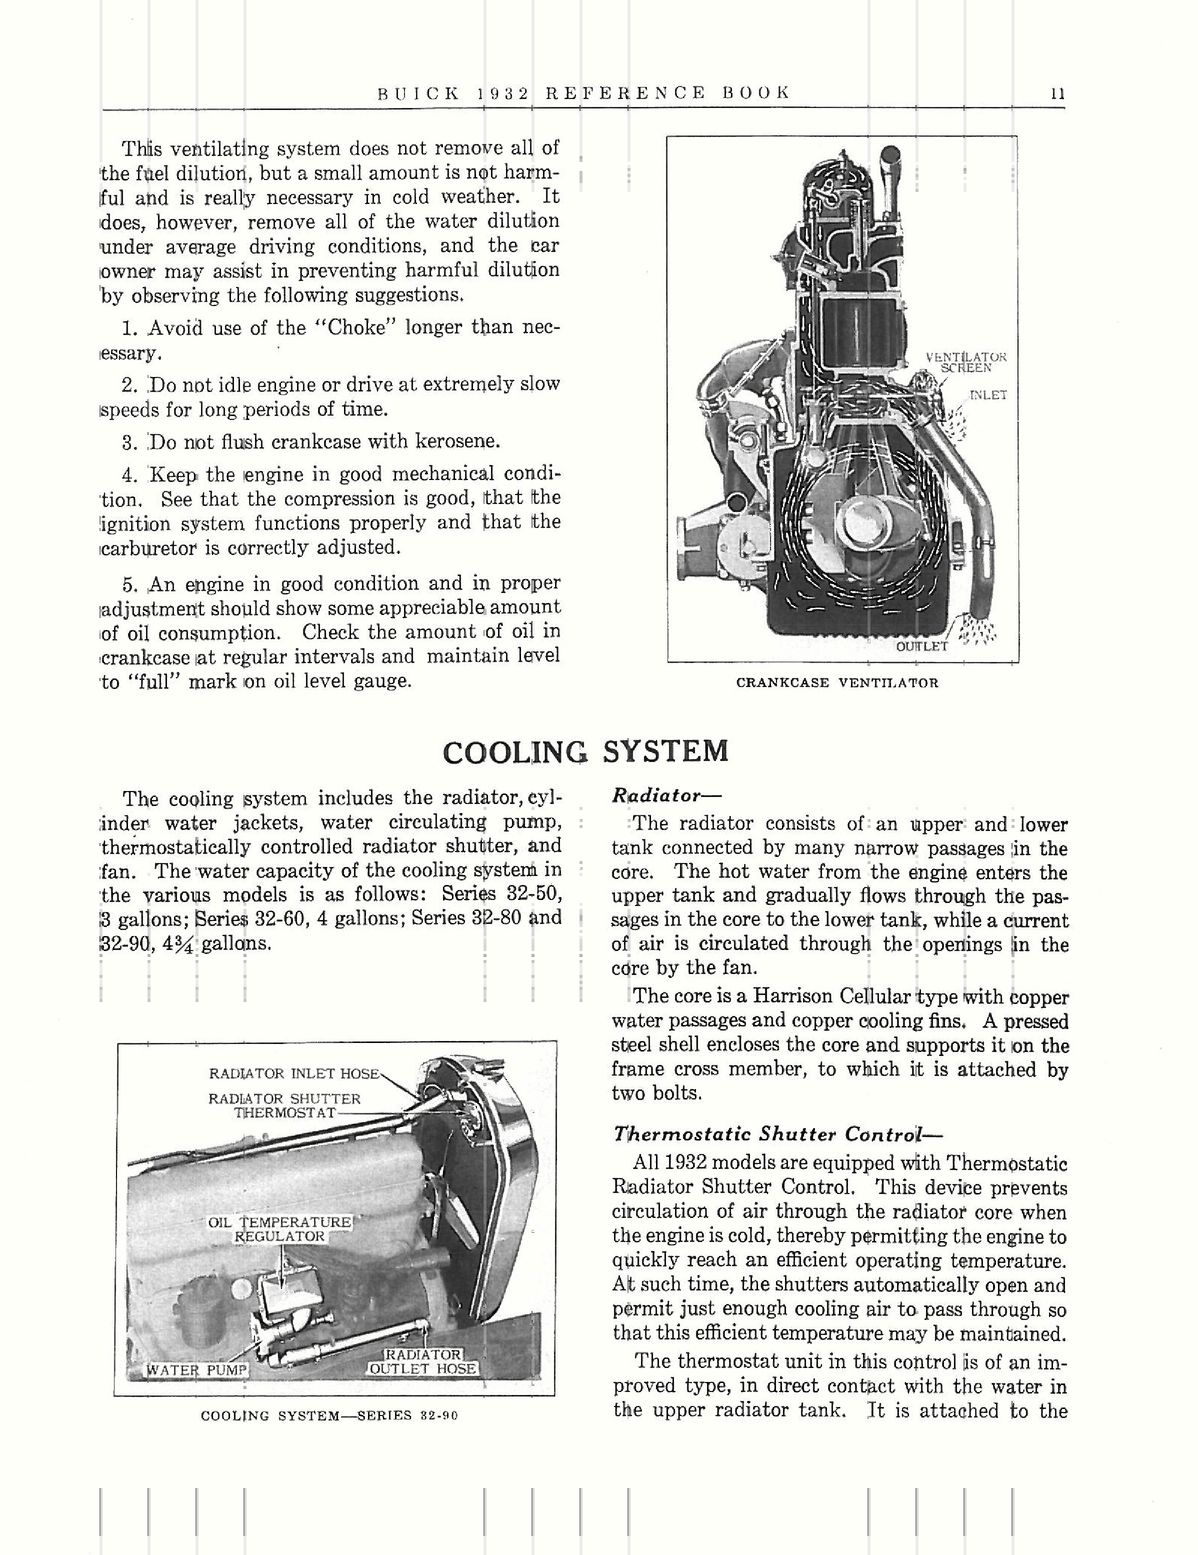 1932 Buick Reference Book-11